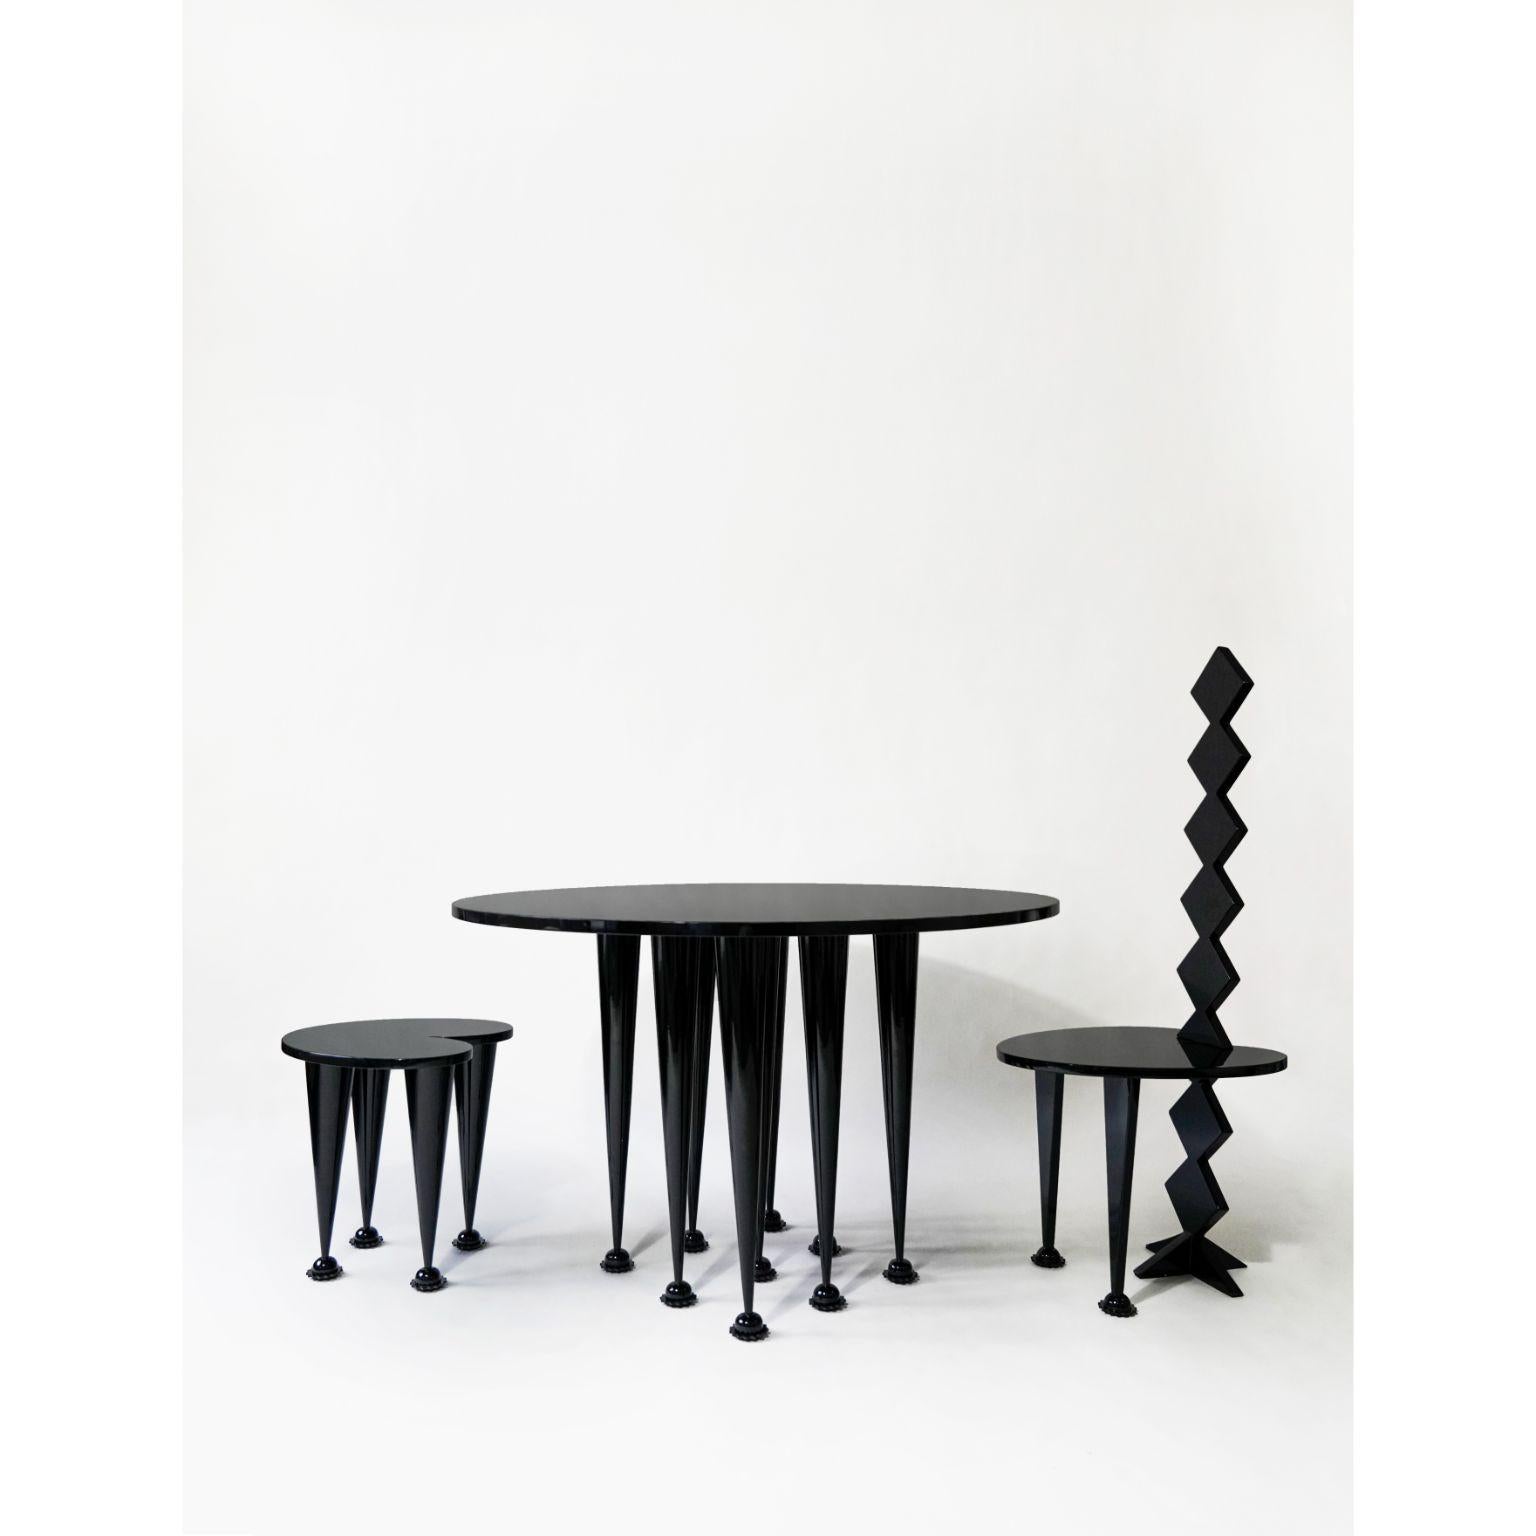 Set of 2 Burning Memories All Black Stools by the Shaw 1